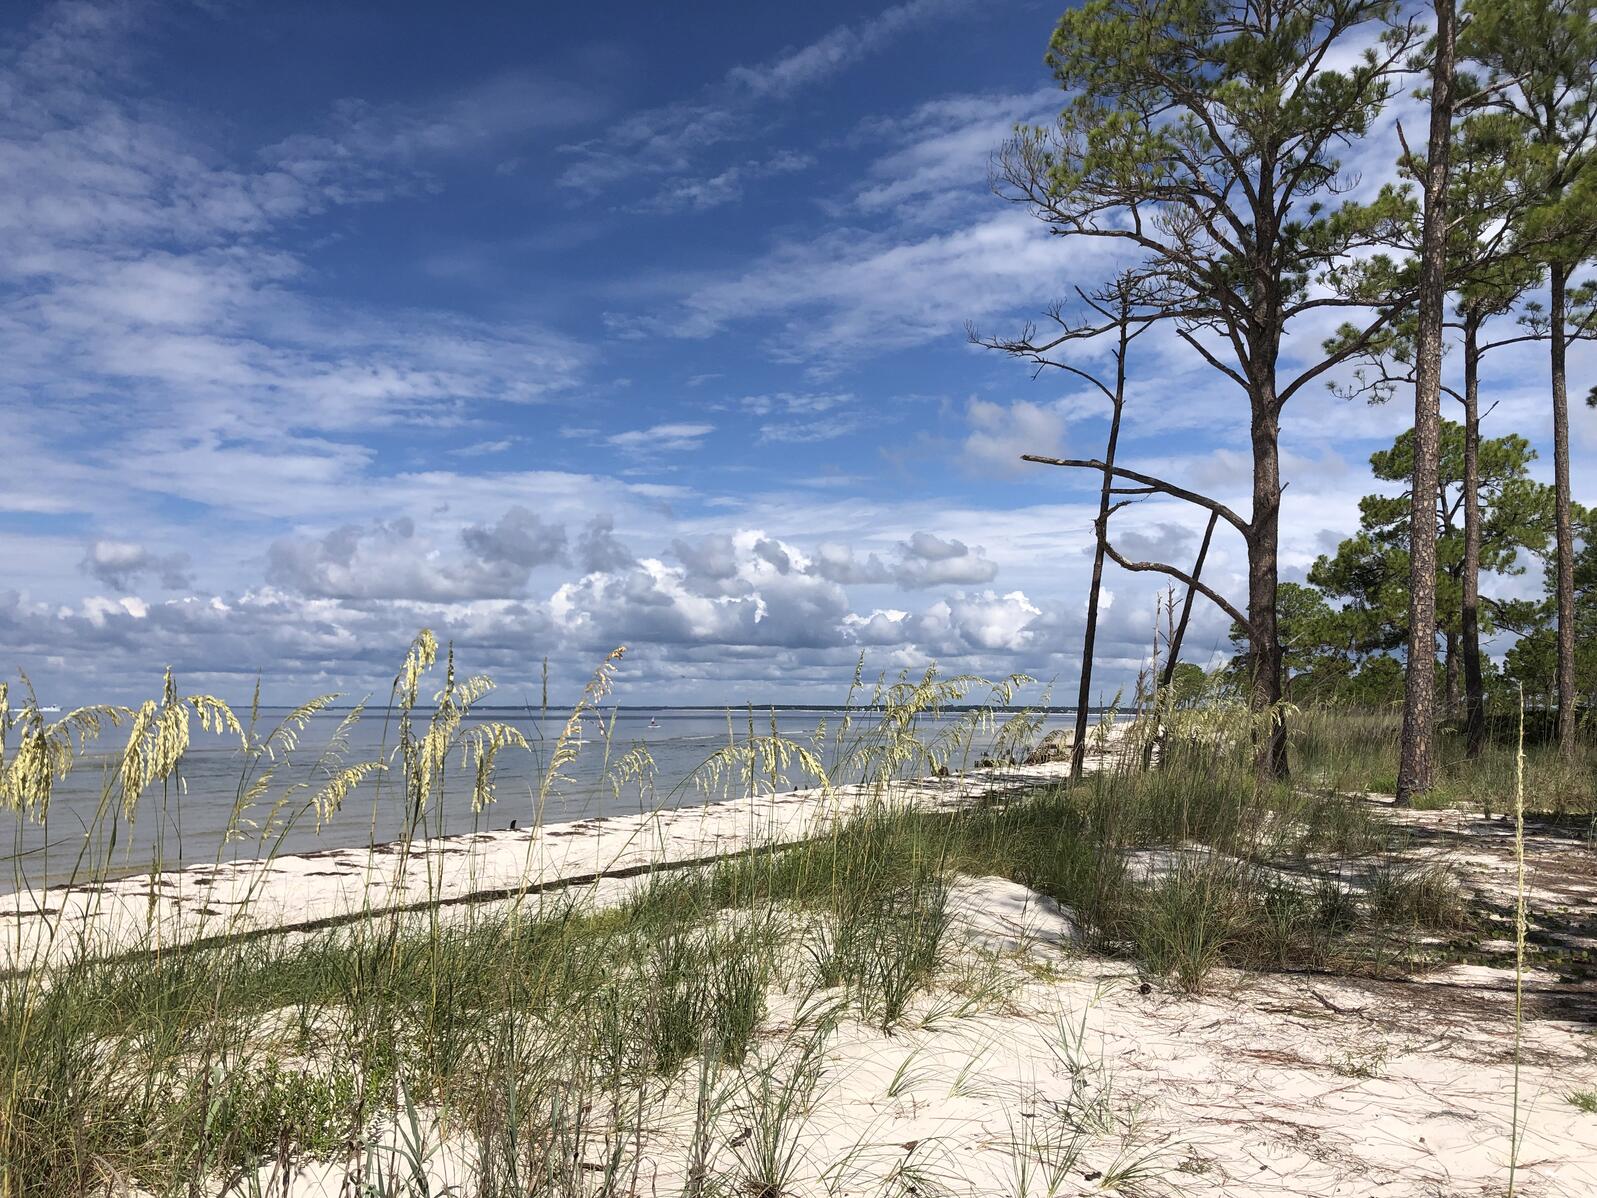 Looking through sea oats to a beach, with water in the background. Pine trees stand at the right-hand edge of the photo.